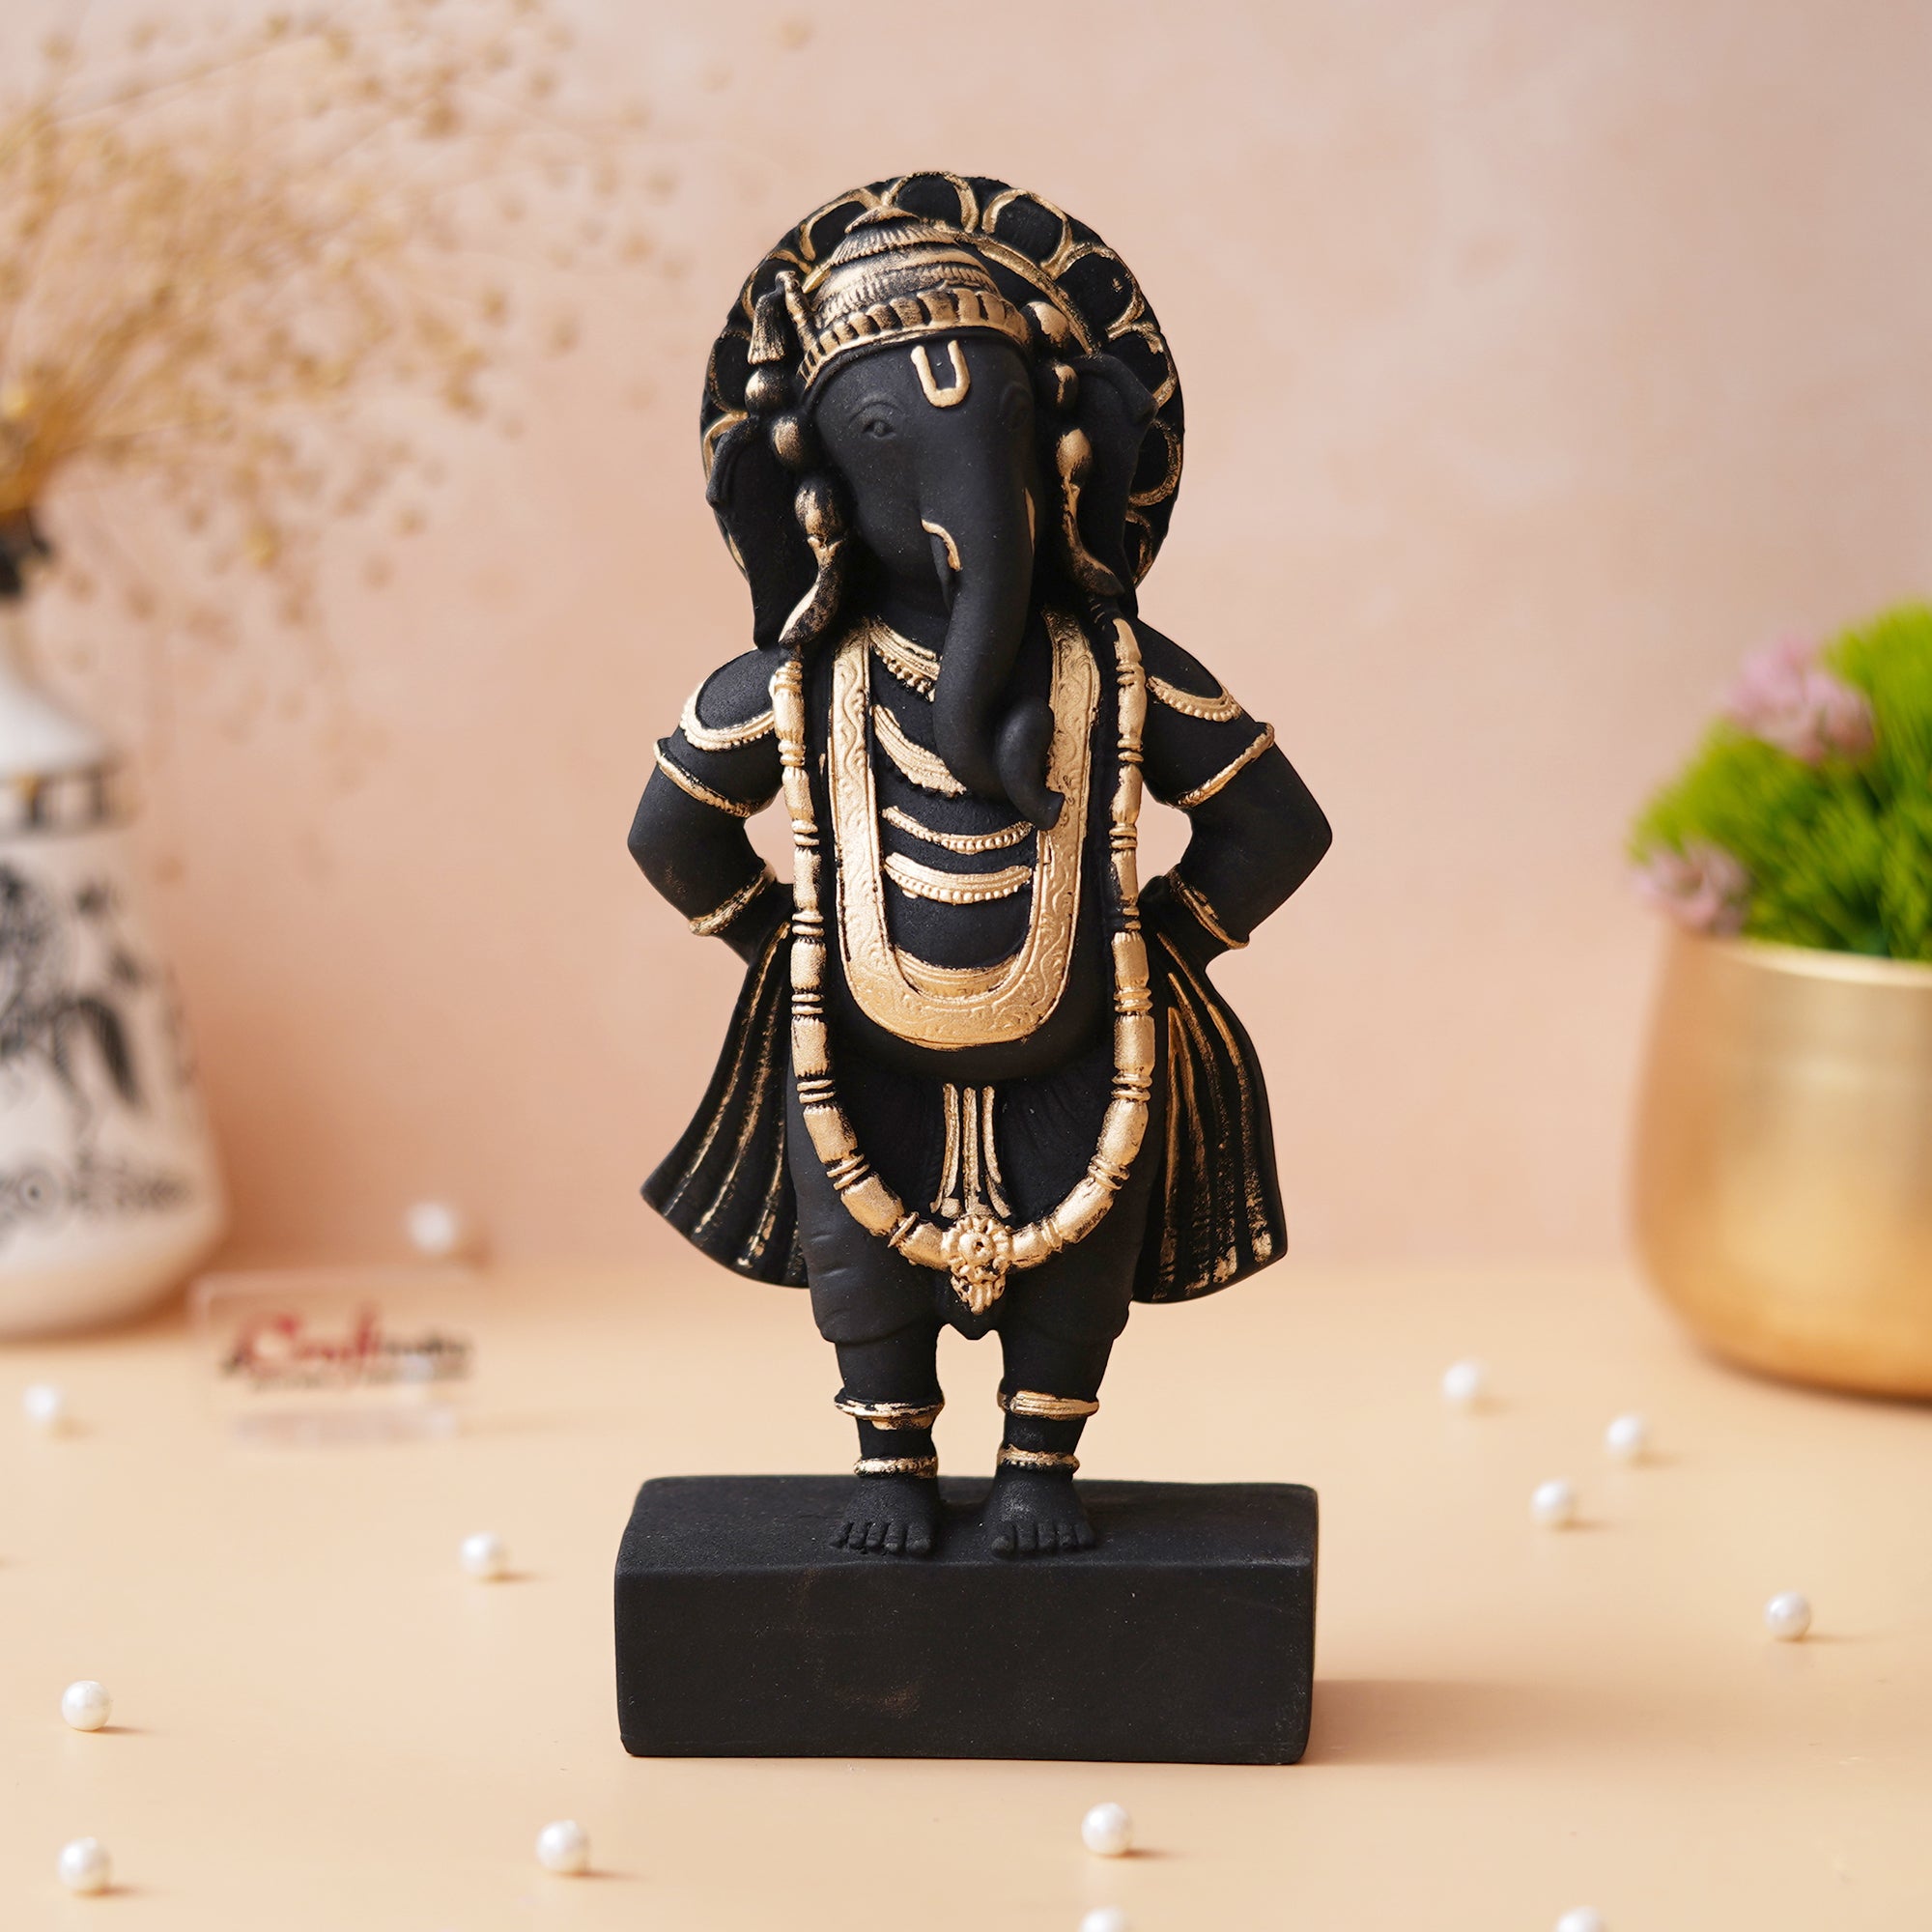 Black & Golden Polyresin Handcrafted Standing Lord Ganesha Statue 4